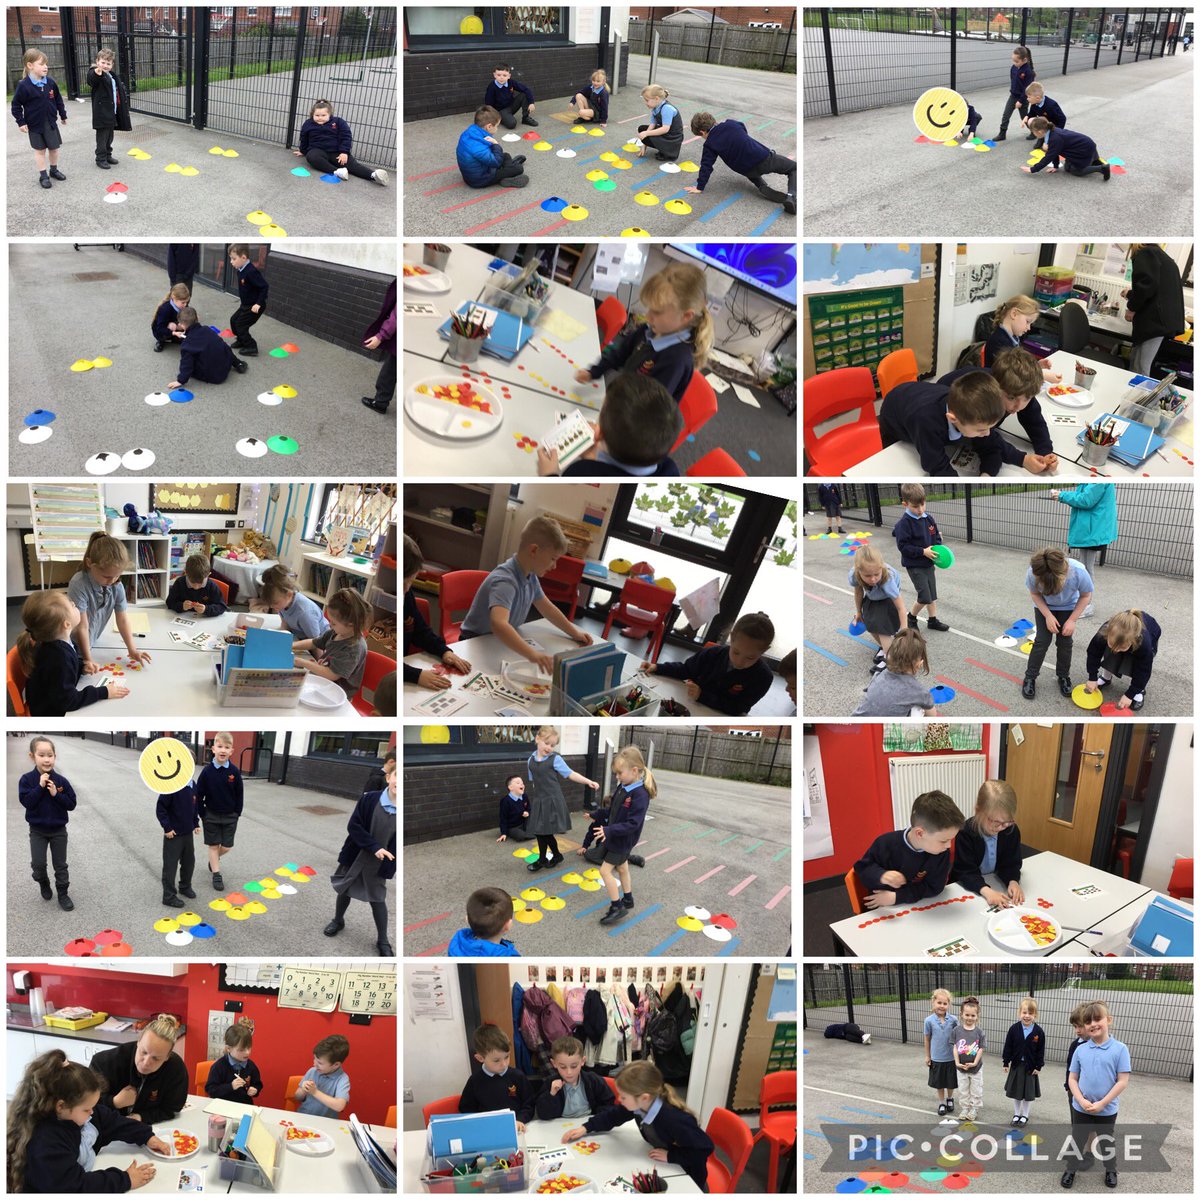 We can share into equal groups and explain our findings. Super active learning to get us started and then some tricky challenges to consolidate our learning. I am so proud of you year 1. @Inspire_Ashton @inspire_pe @Inspire_Maths1